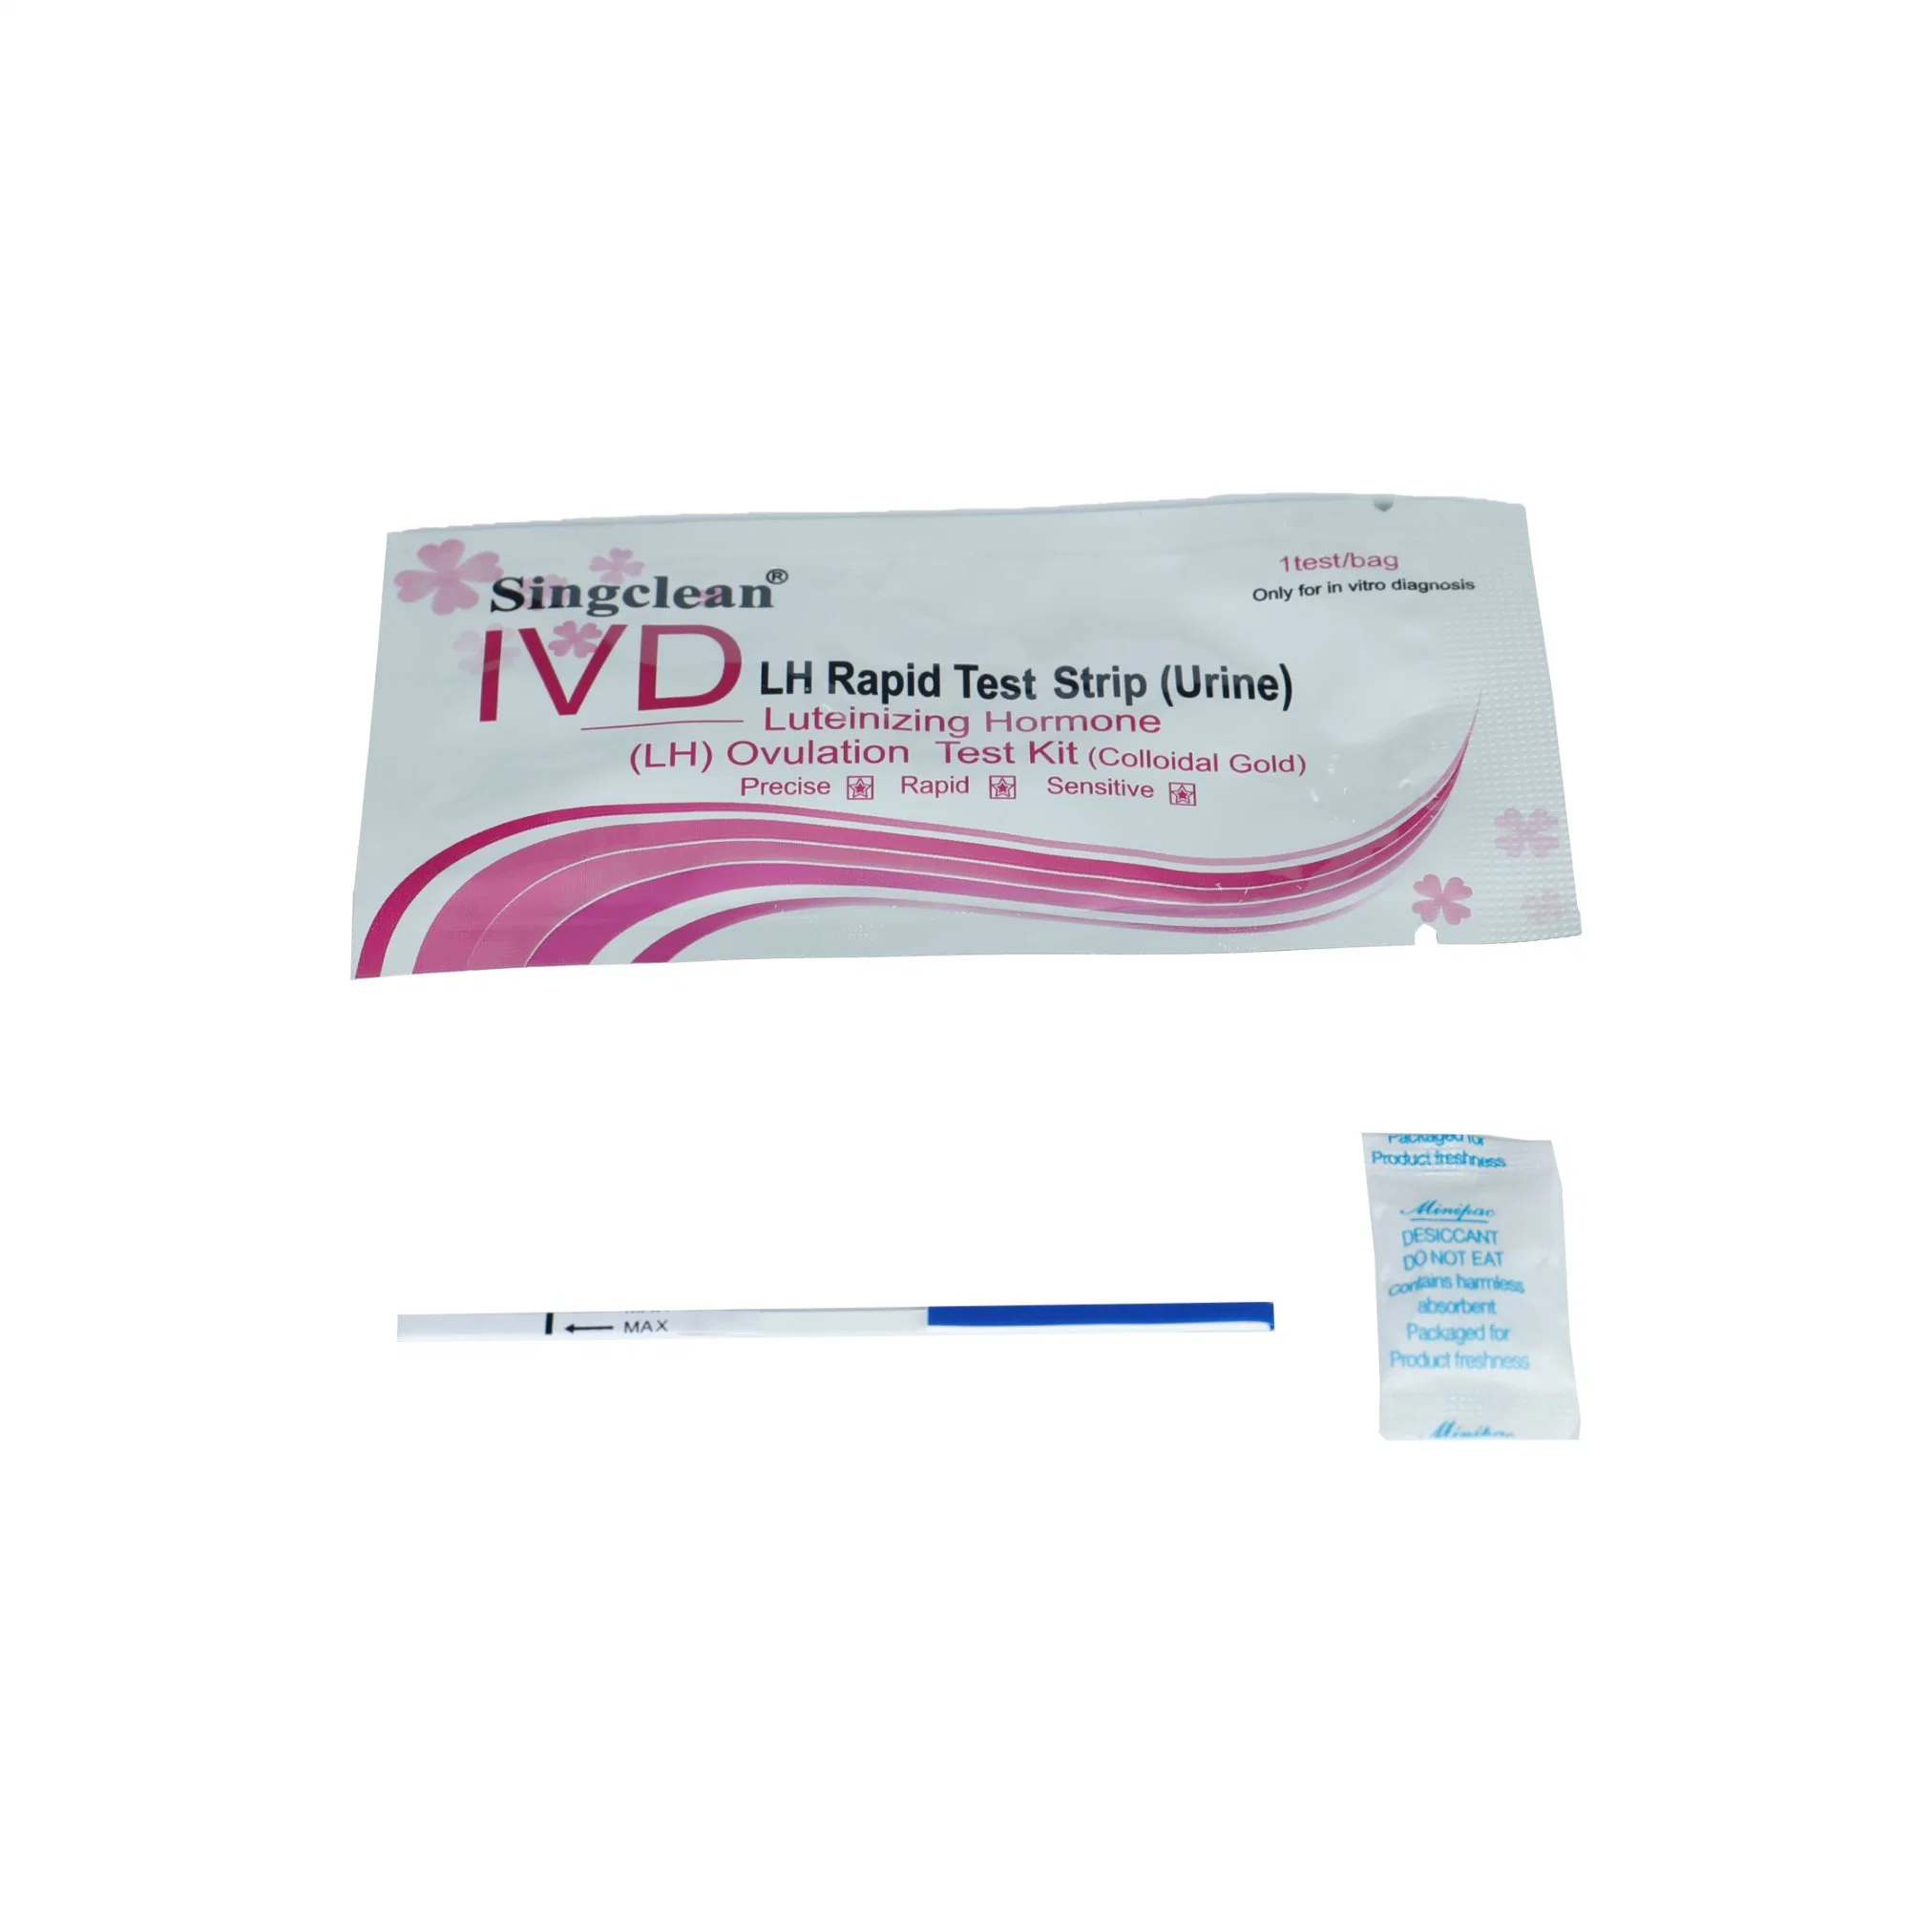 Singclean Wholesale/Supplier CE Approved Ivd One Stepd Rapid Homely Meidcal Lh Test Strip Kit for Irregular Menstrual Periods